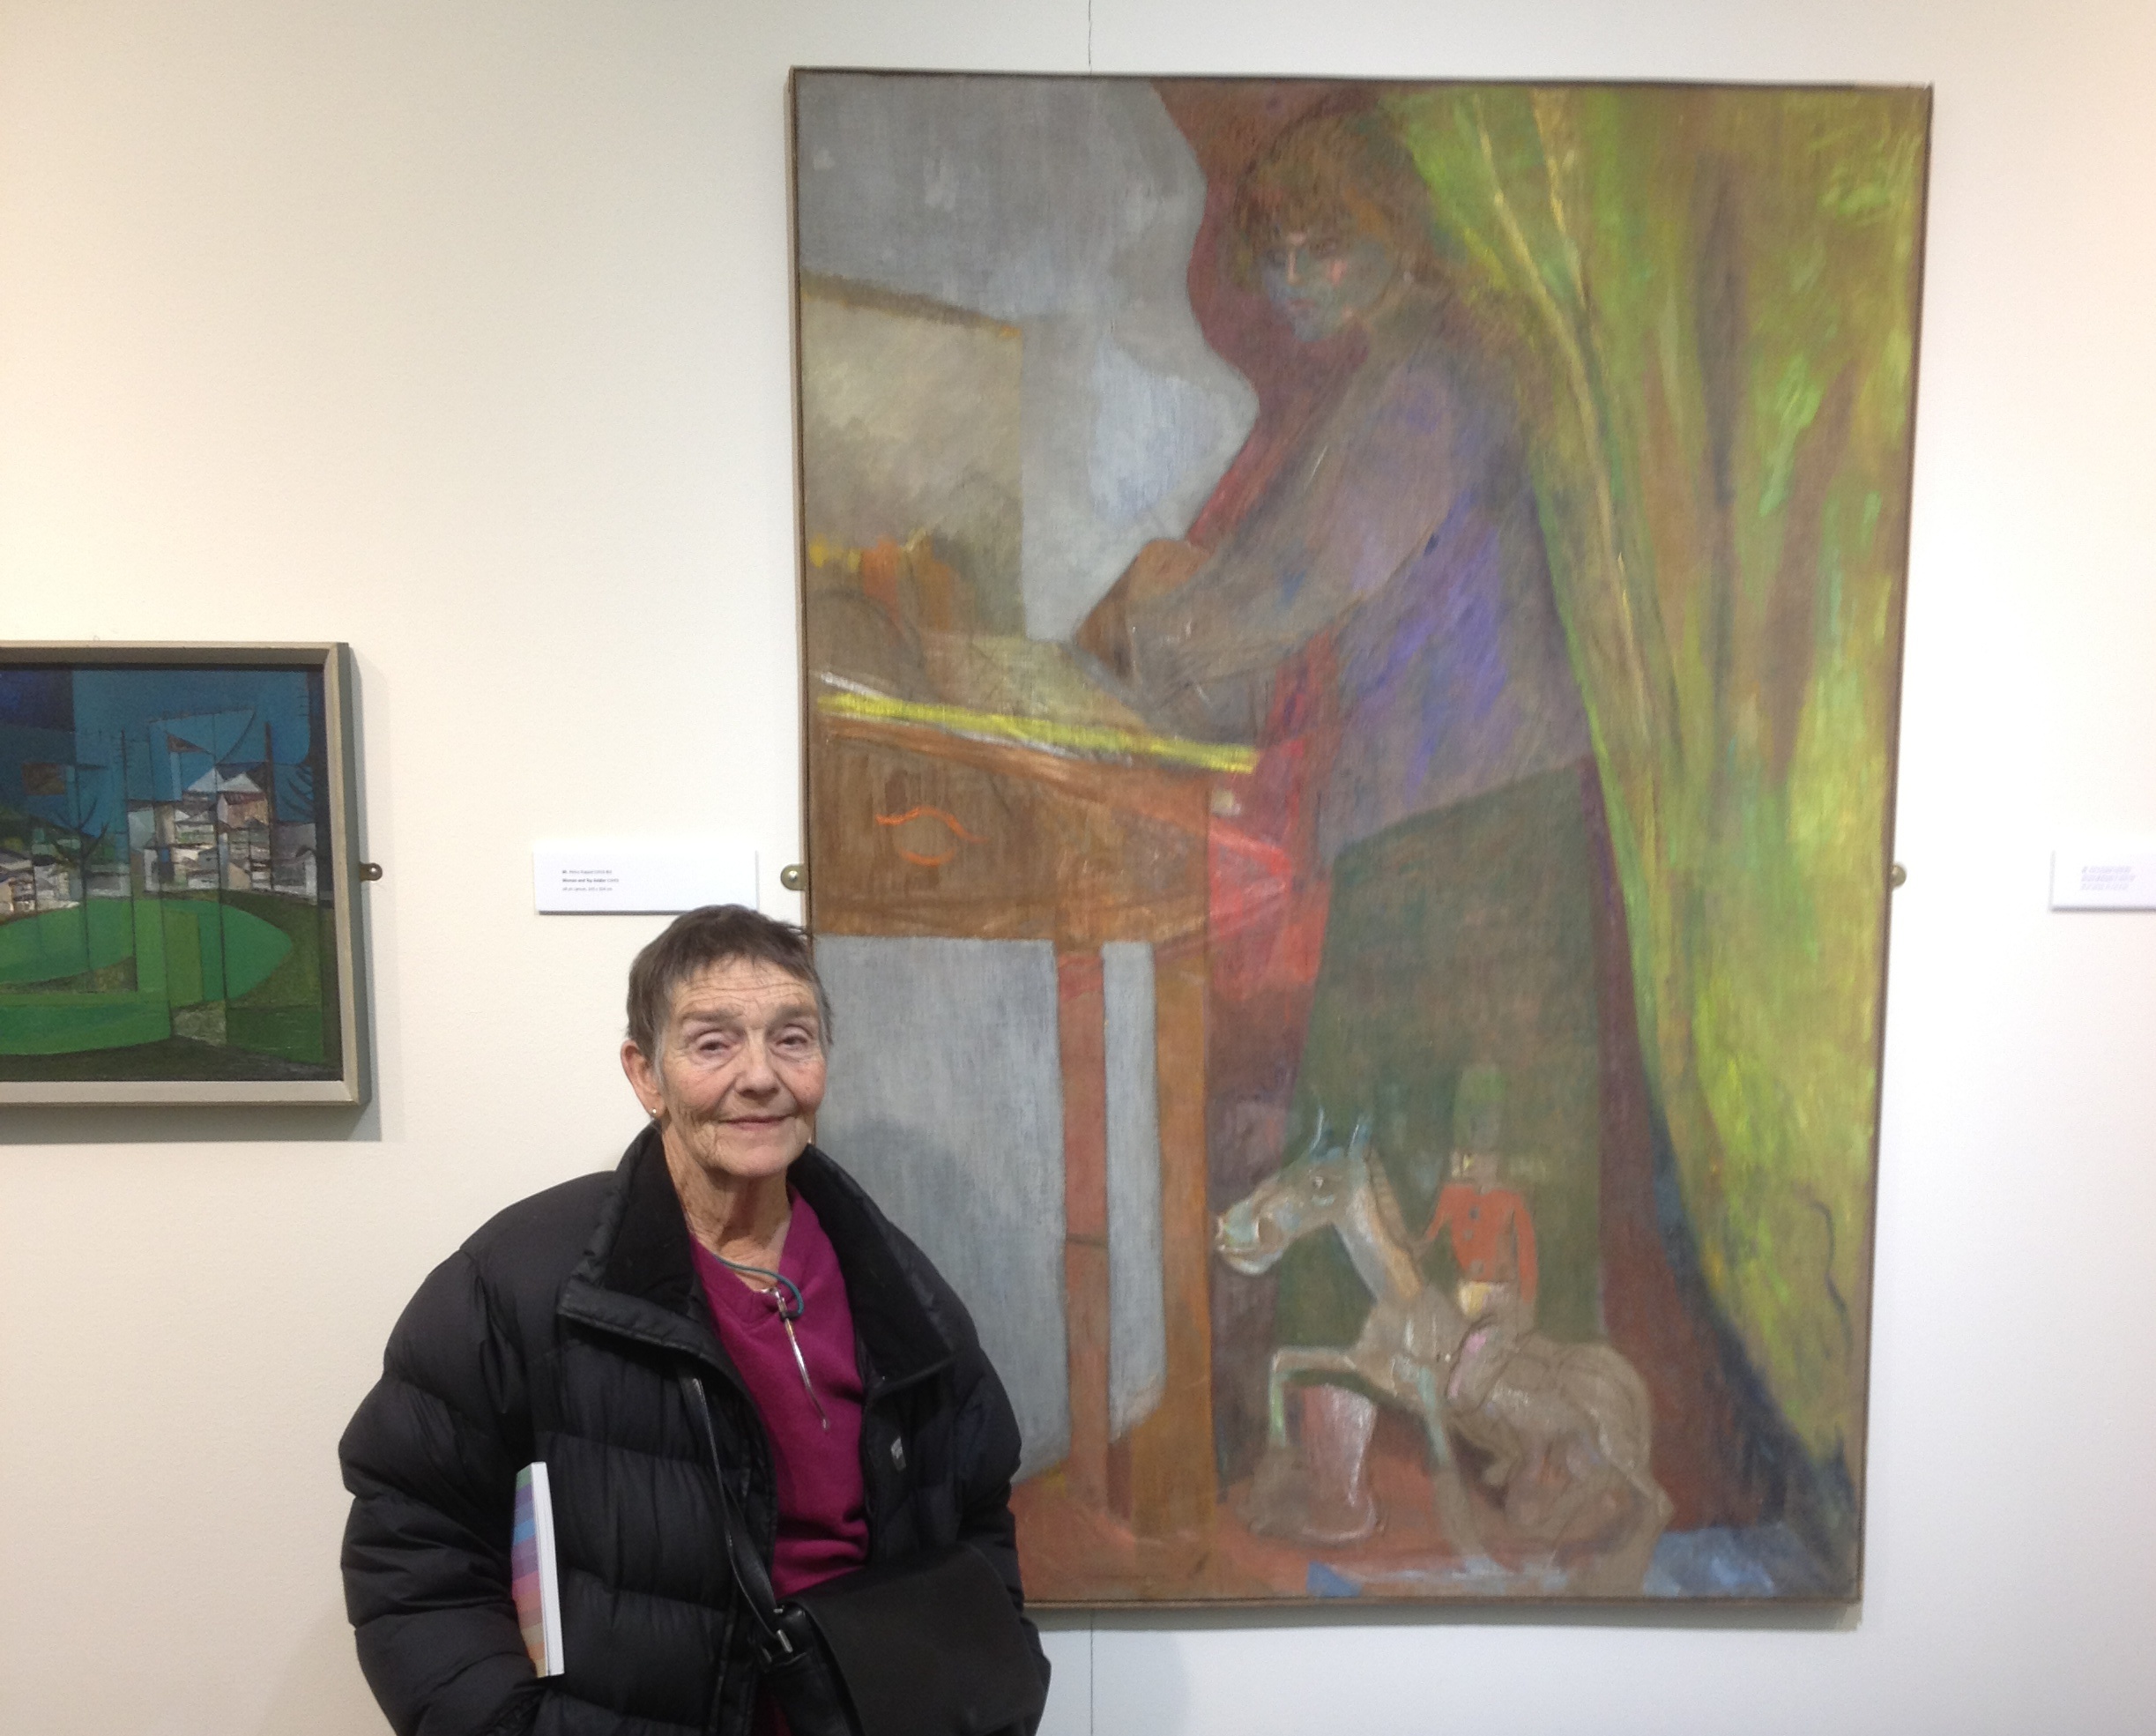 Pip Koppel with paintings by Robert Hunter and Heinz Koppel, '56 Group - Then' exhibition, Oriel y Bont (February 2013)